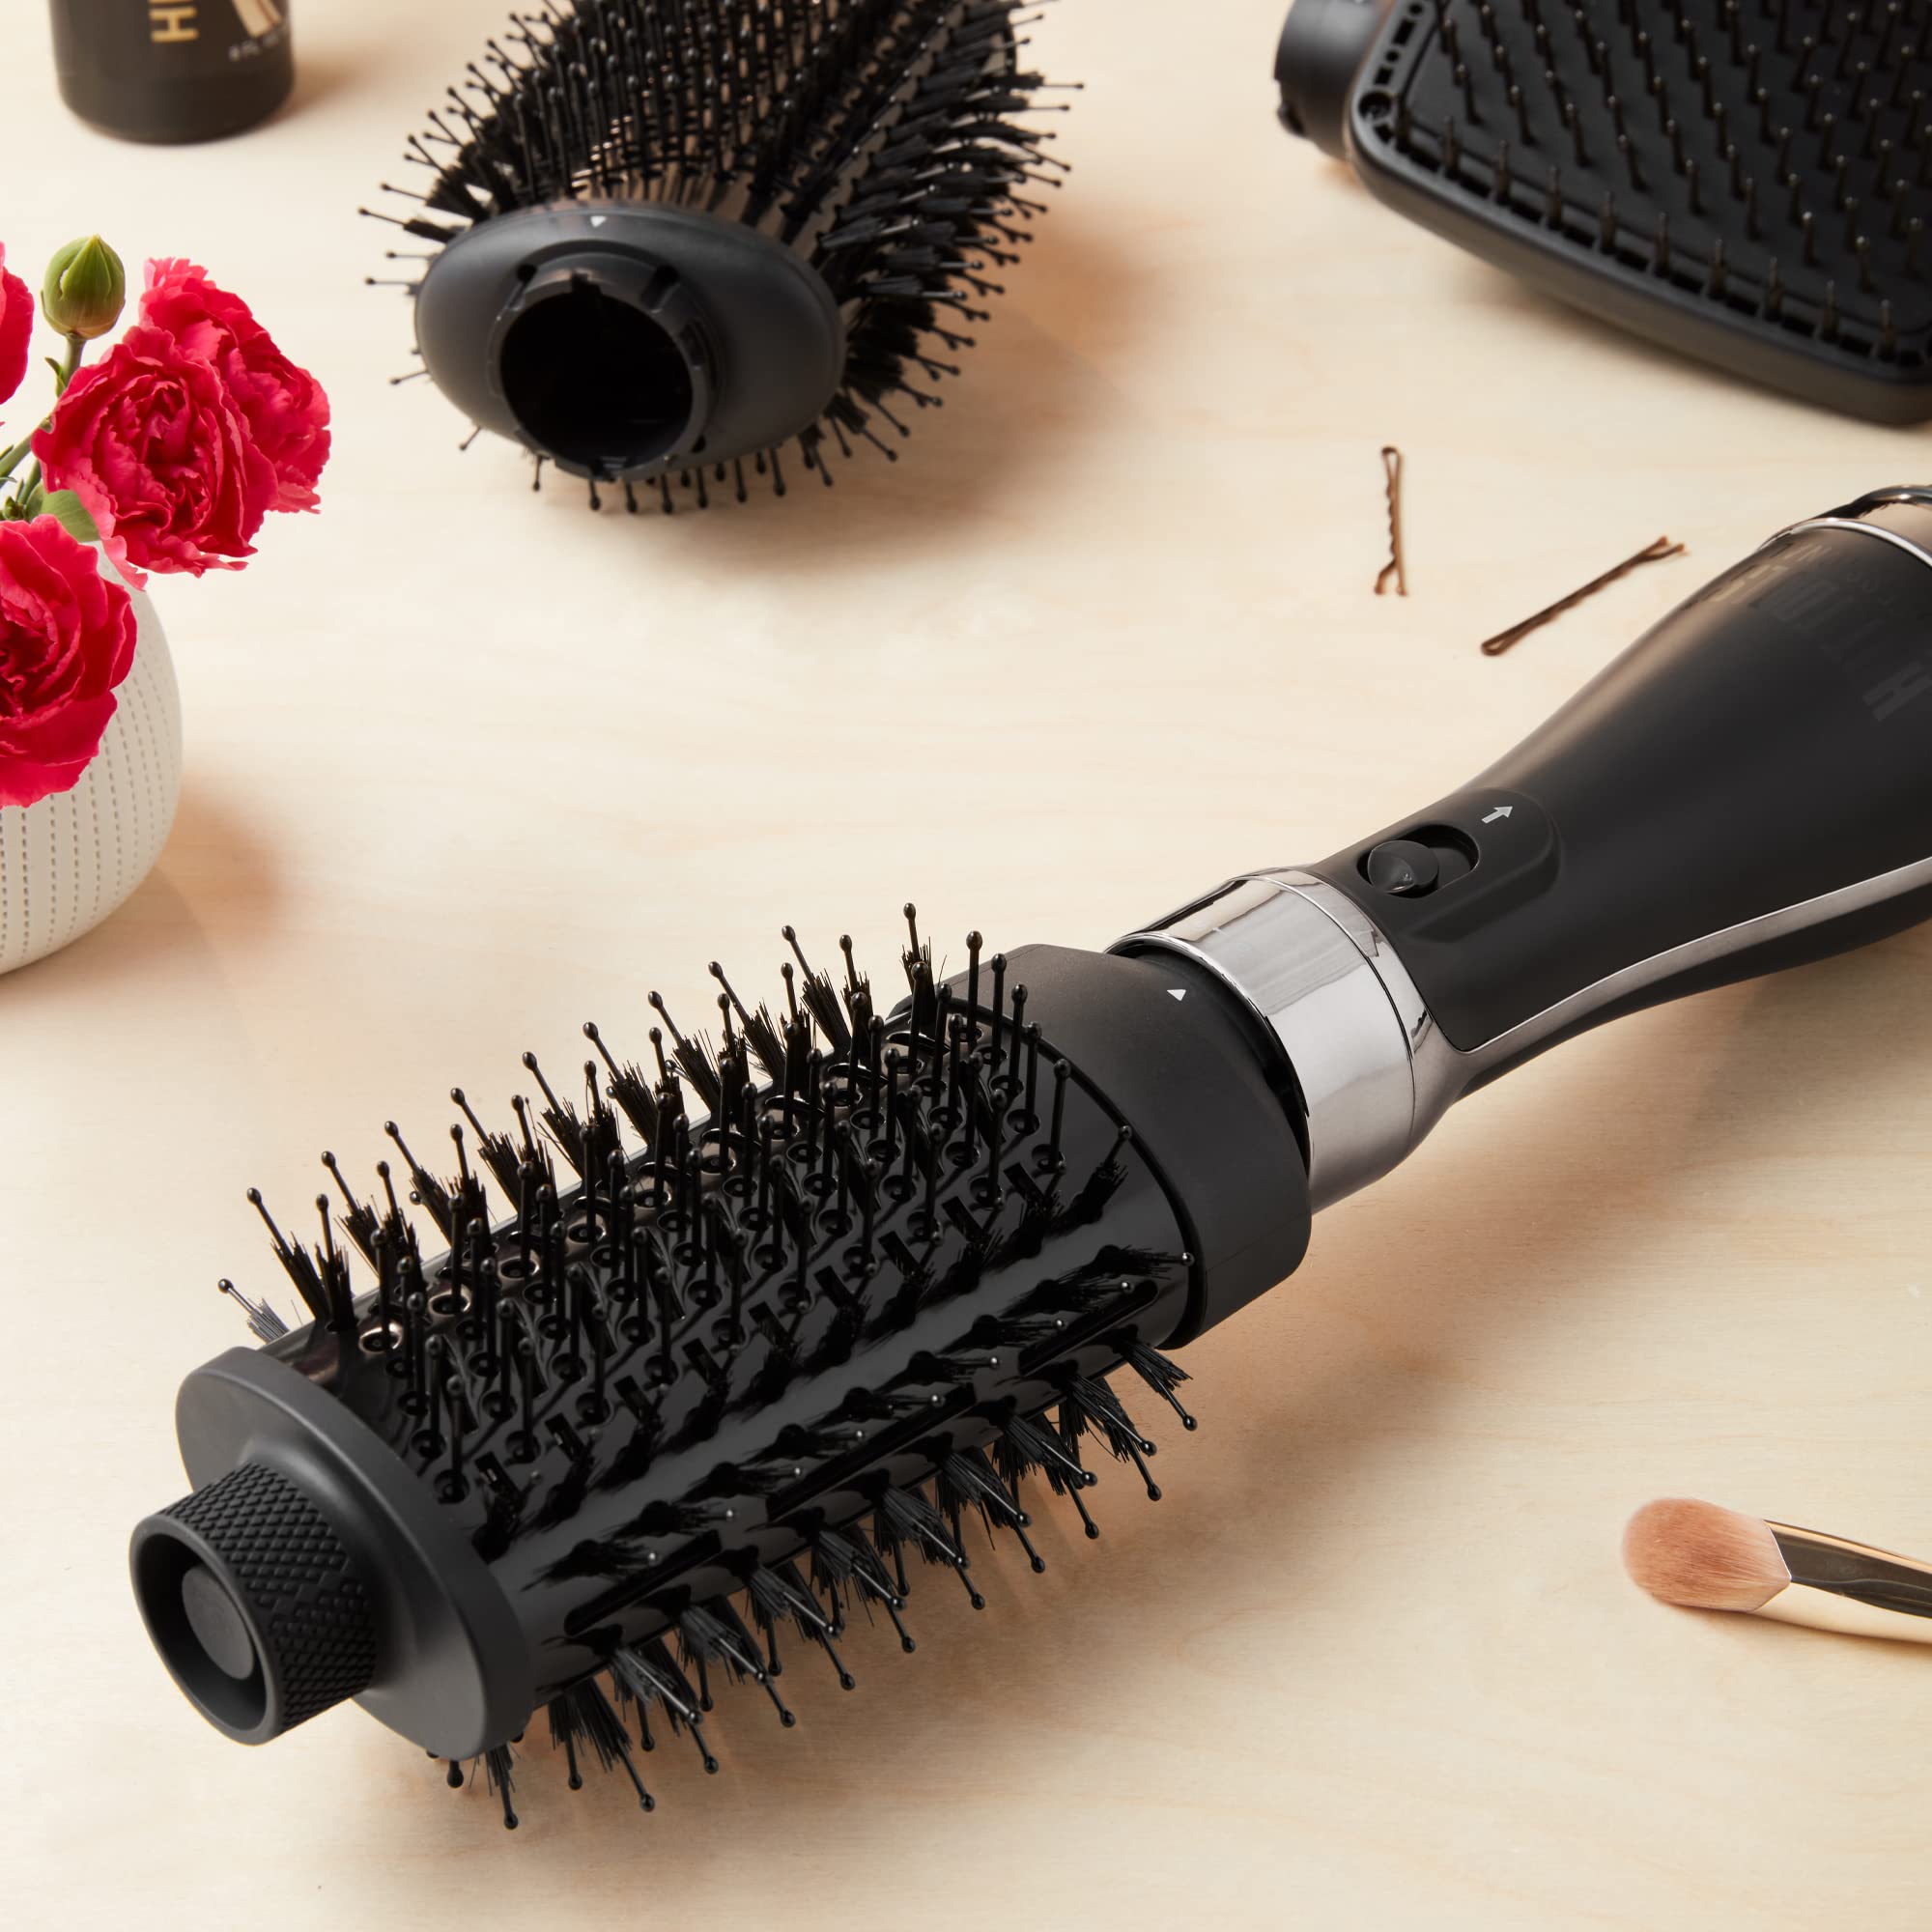 Hot Tools Pro Artist Black Gold Detachable One Step Volumizer and Hair Dryer | Pro Drying & Styling (Medium)